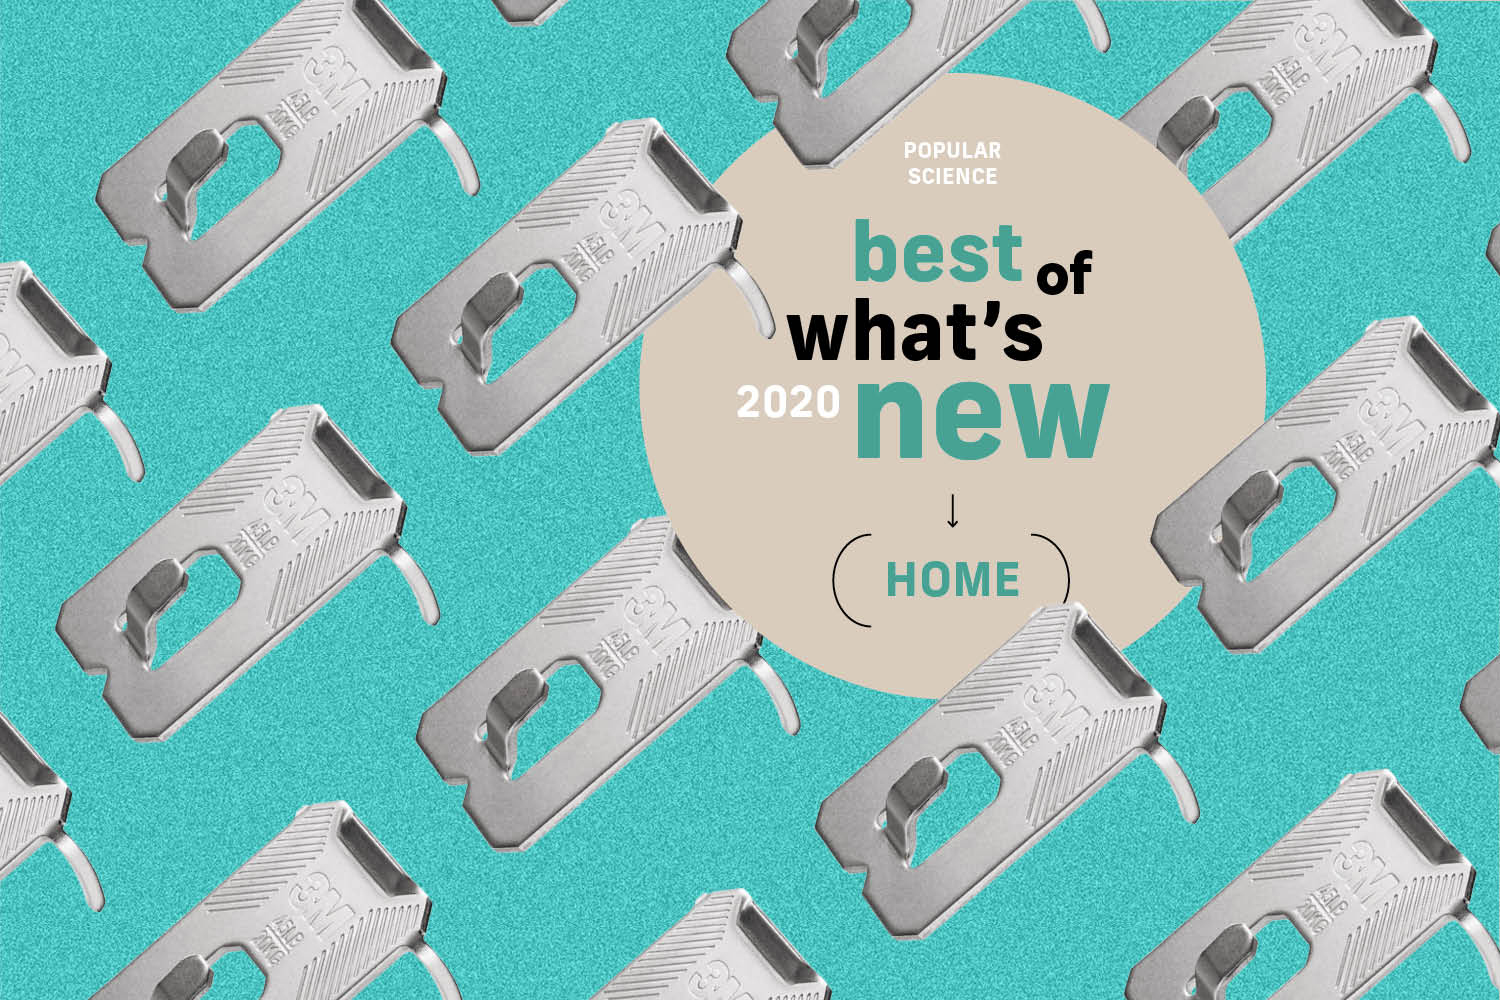 The 8 most helpful new home products of 2020